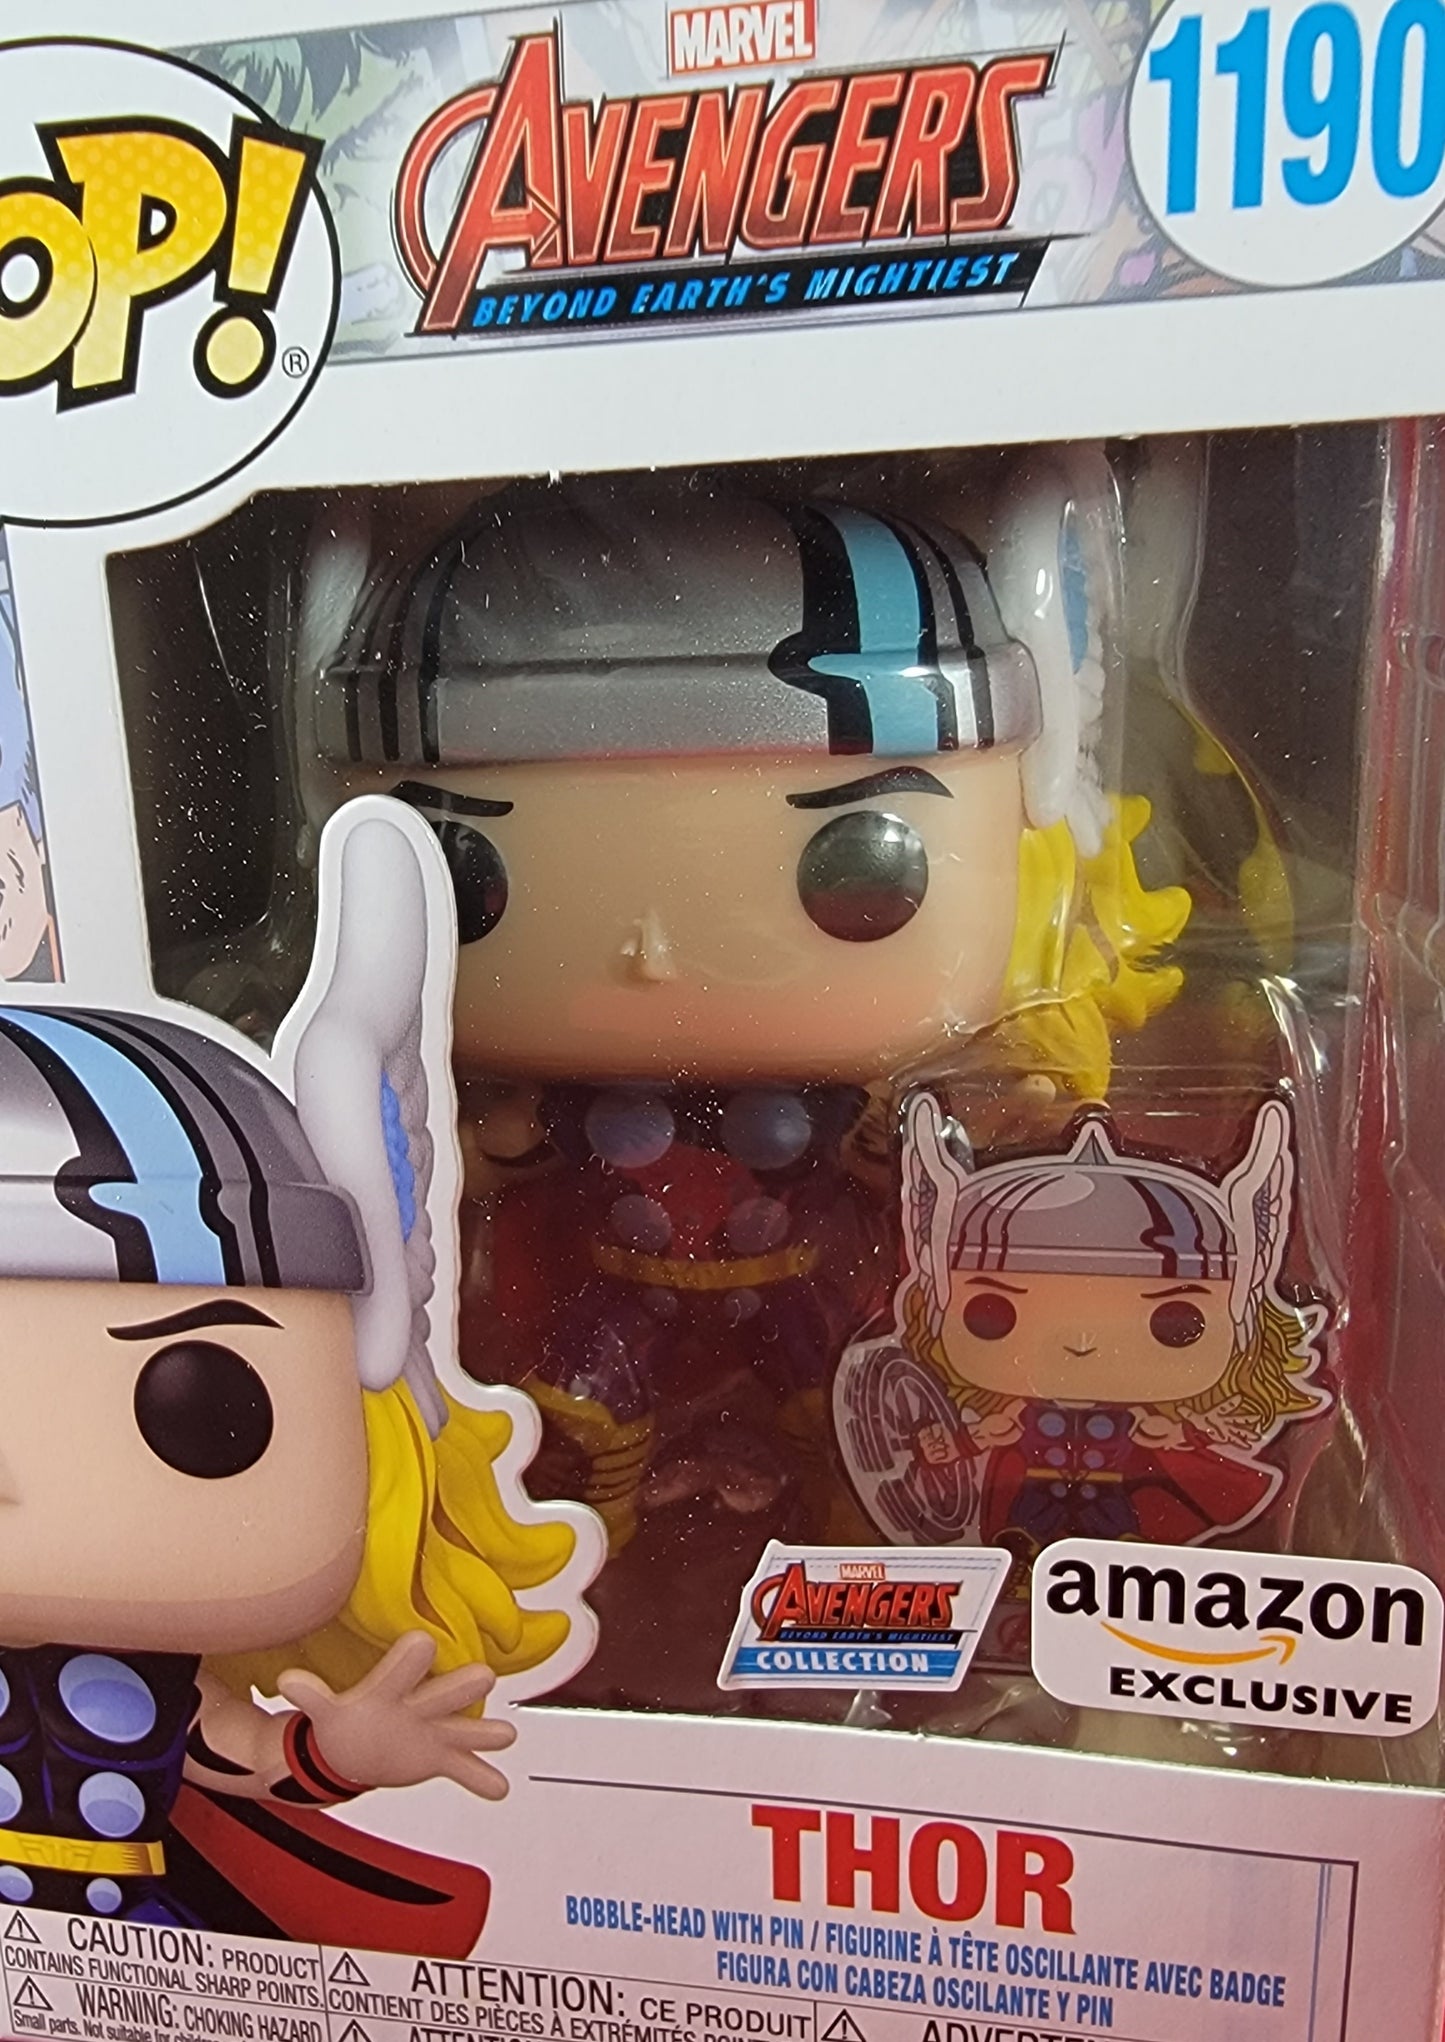 Thor amazon Exclusive funko # 1190 (nib)
brand new Marvel avengers beyond earth's mightiest. pop has thor and pin in comic book form. pop is in near perfect condition and will be shipped in a compatible pop protector.